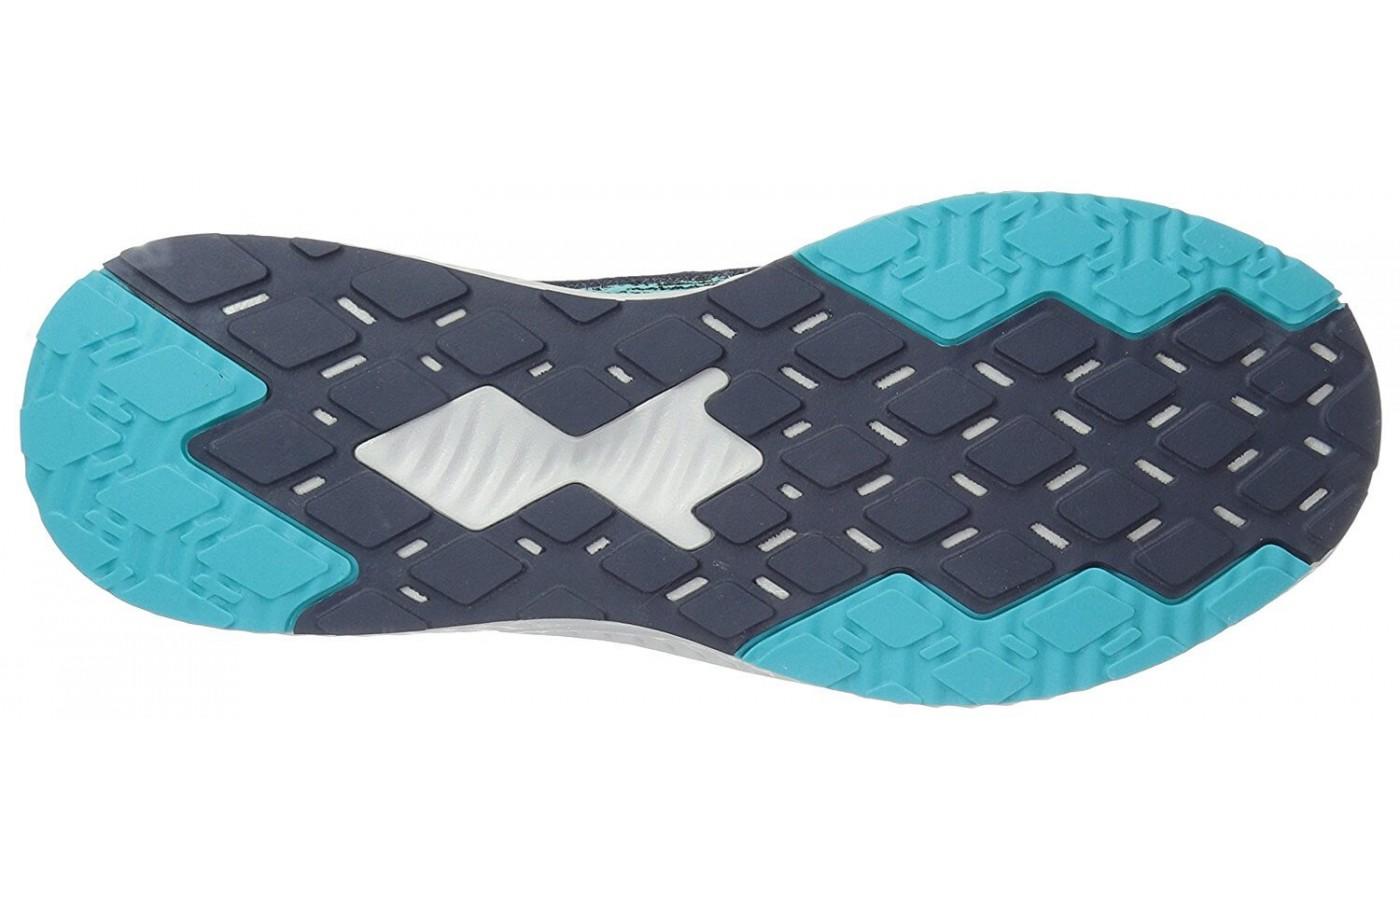 The unique diamond pattern of the outsole provides added grip